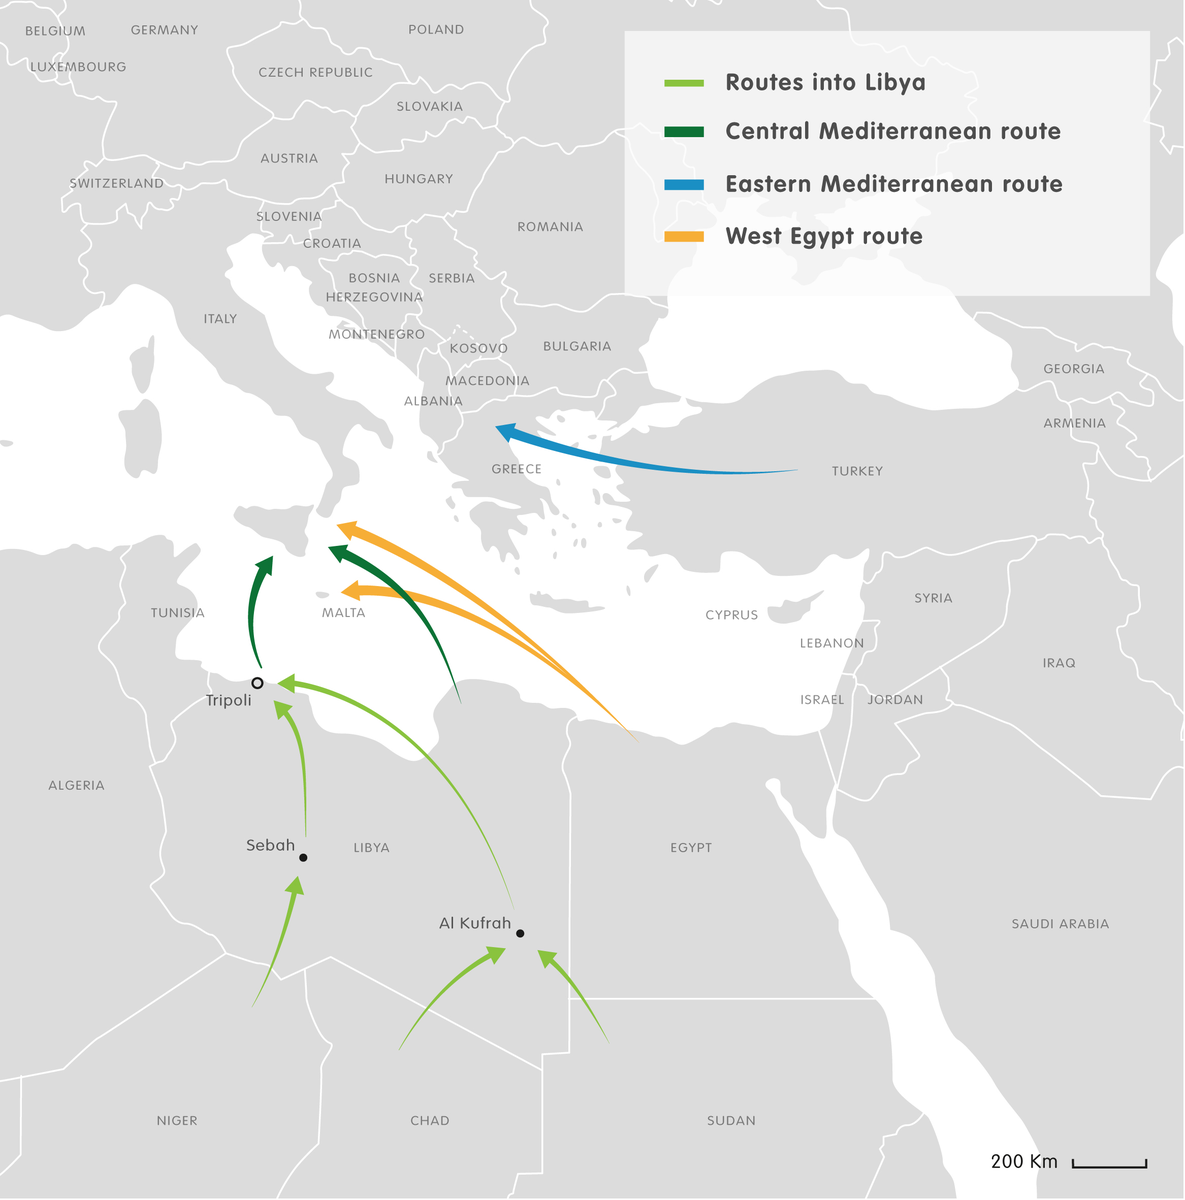 Certainly, at the time, the FPÖ was talking about potential new avenues for illegal migration, such as the ‘Albanian route.’ Libya was (comparatively) less unstable then, but it very likely would have been mentioned by chattering FPÖ circles. 17/